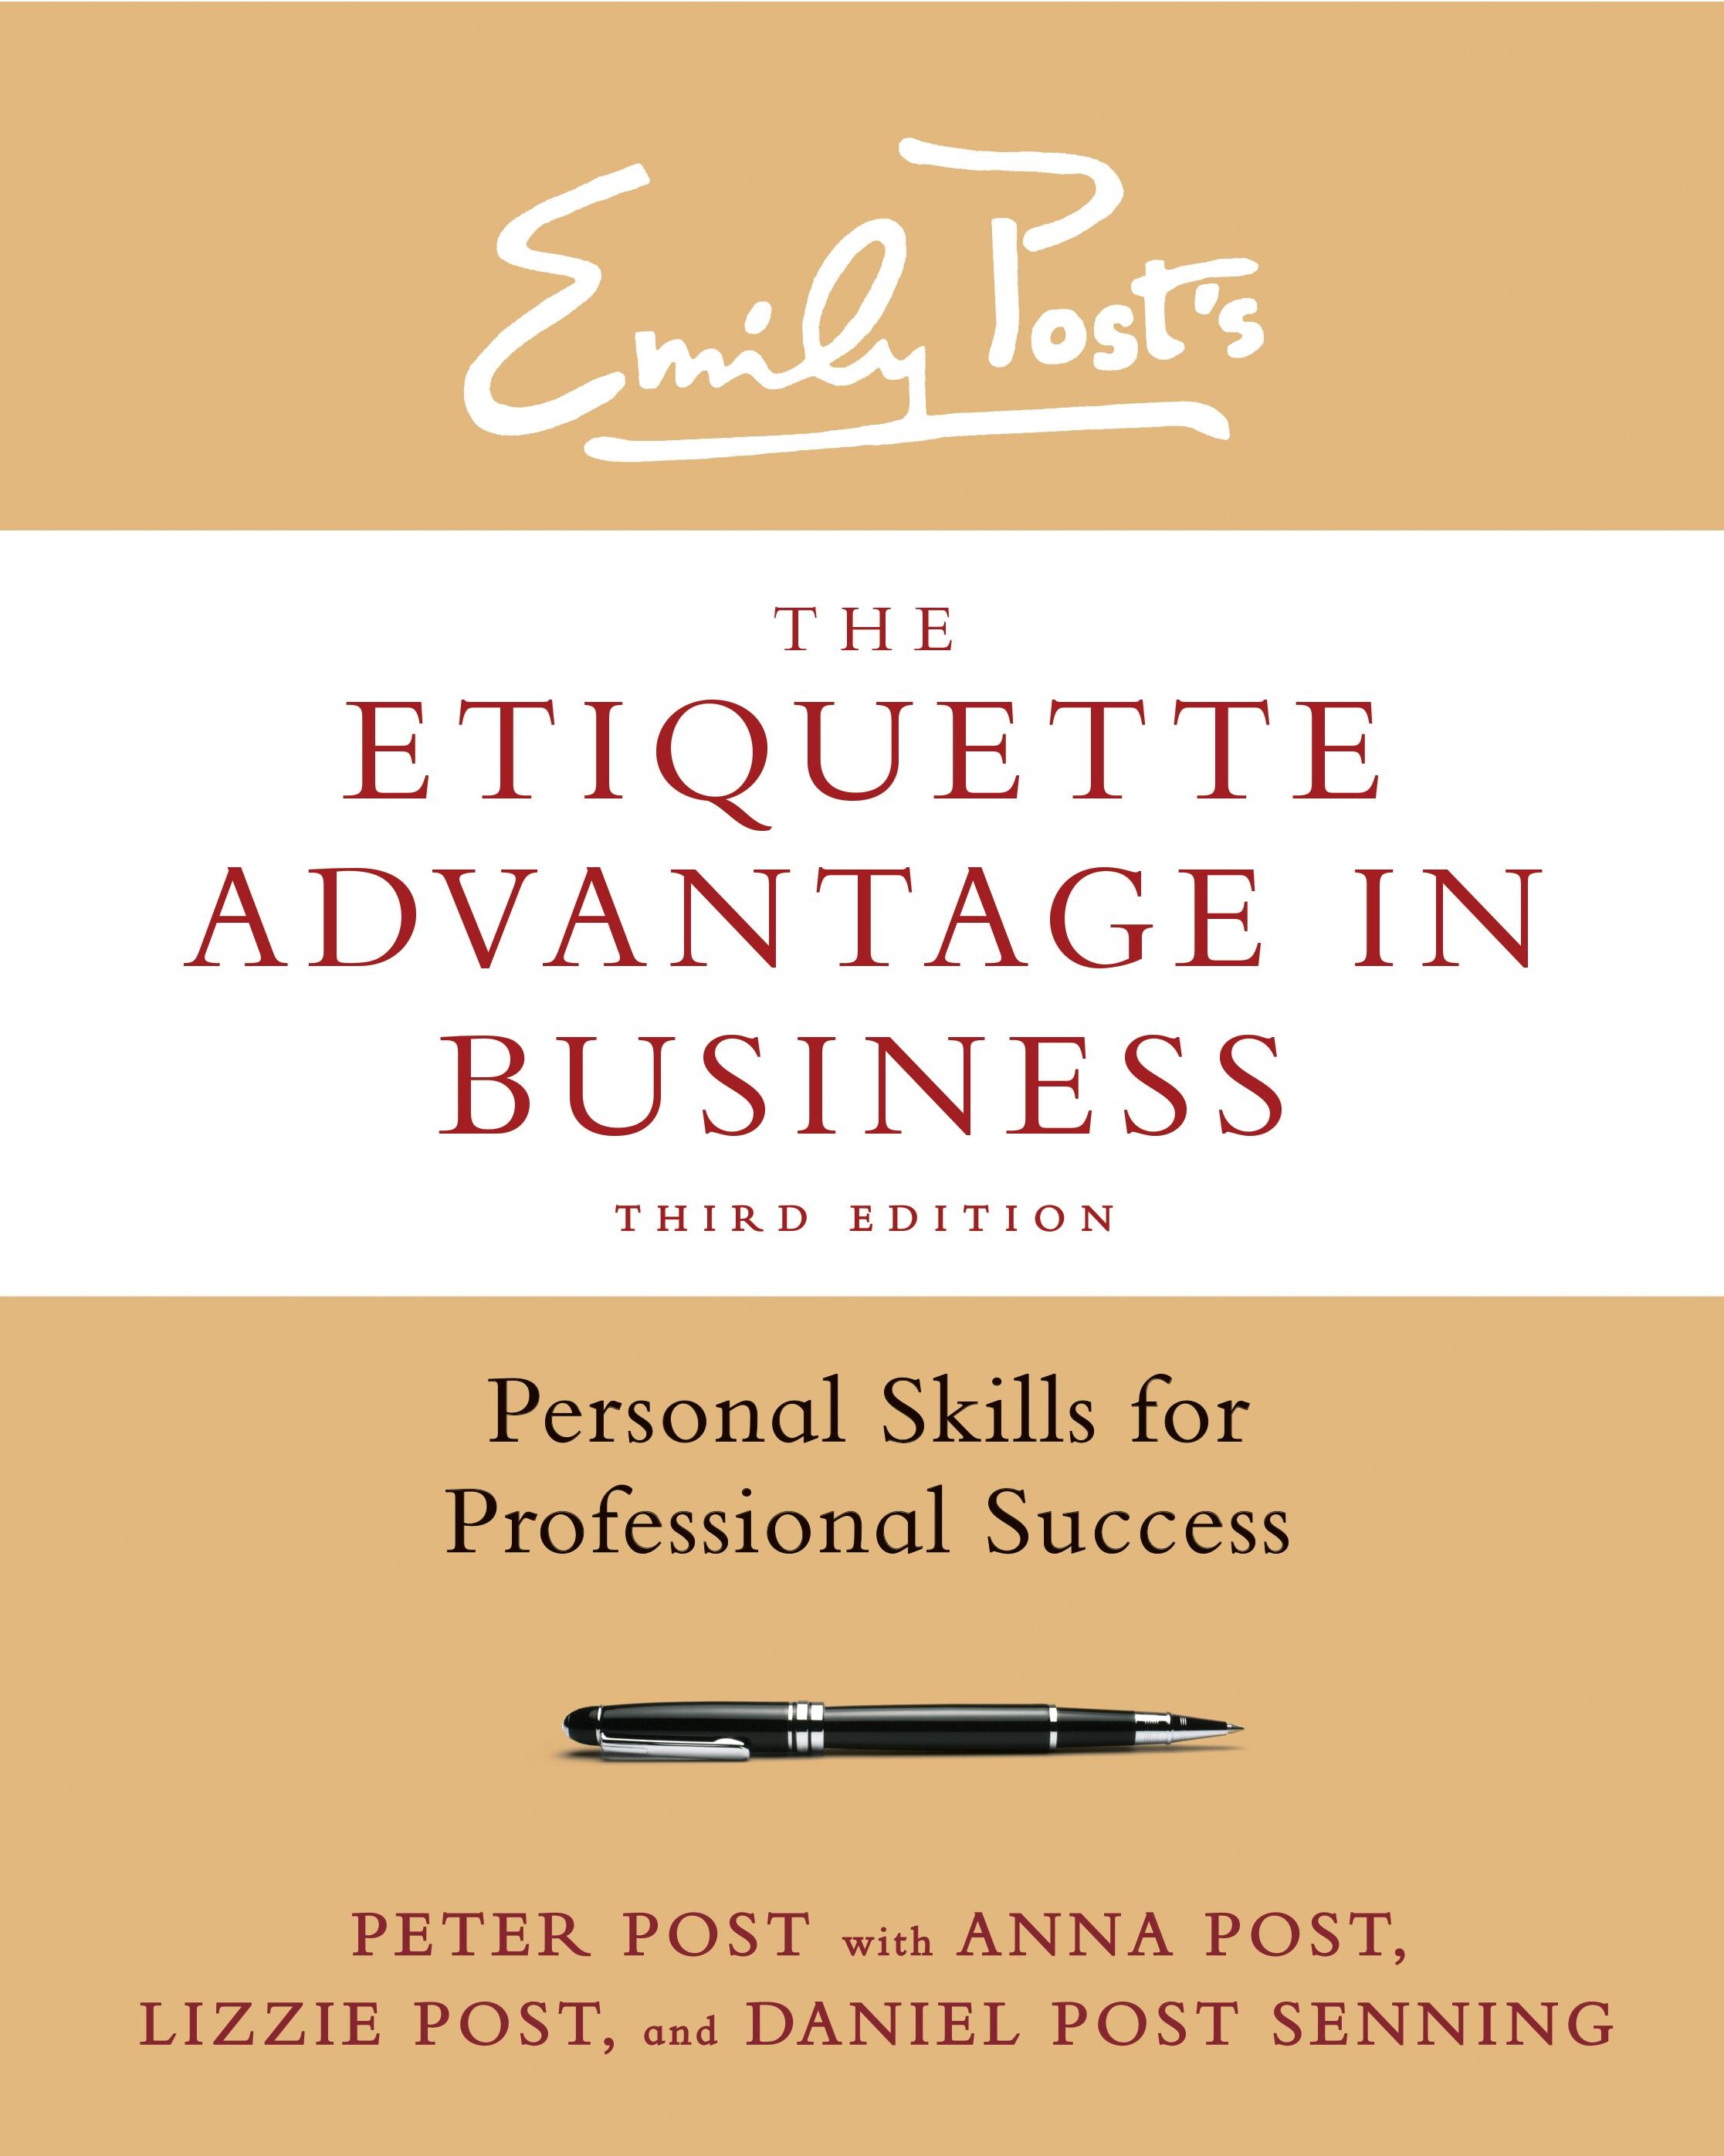 The Etiquette Advantage in Business, 3rd Edition Personal Skills for Professional Success